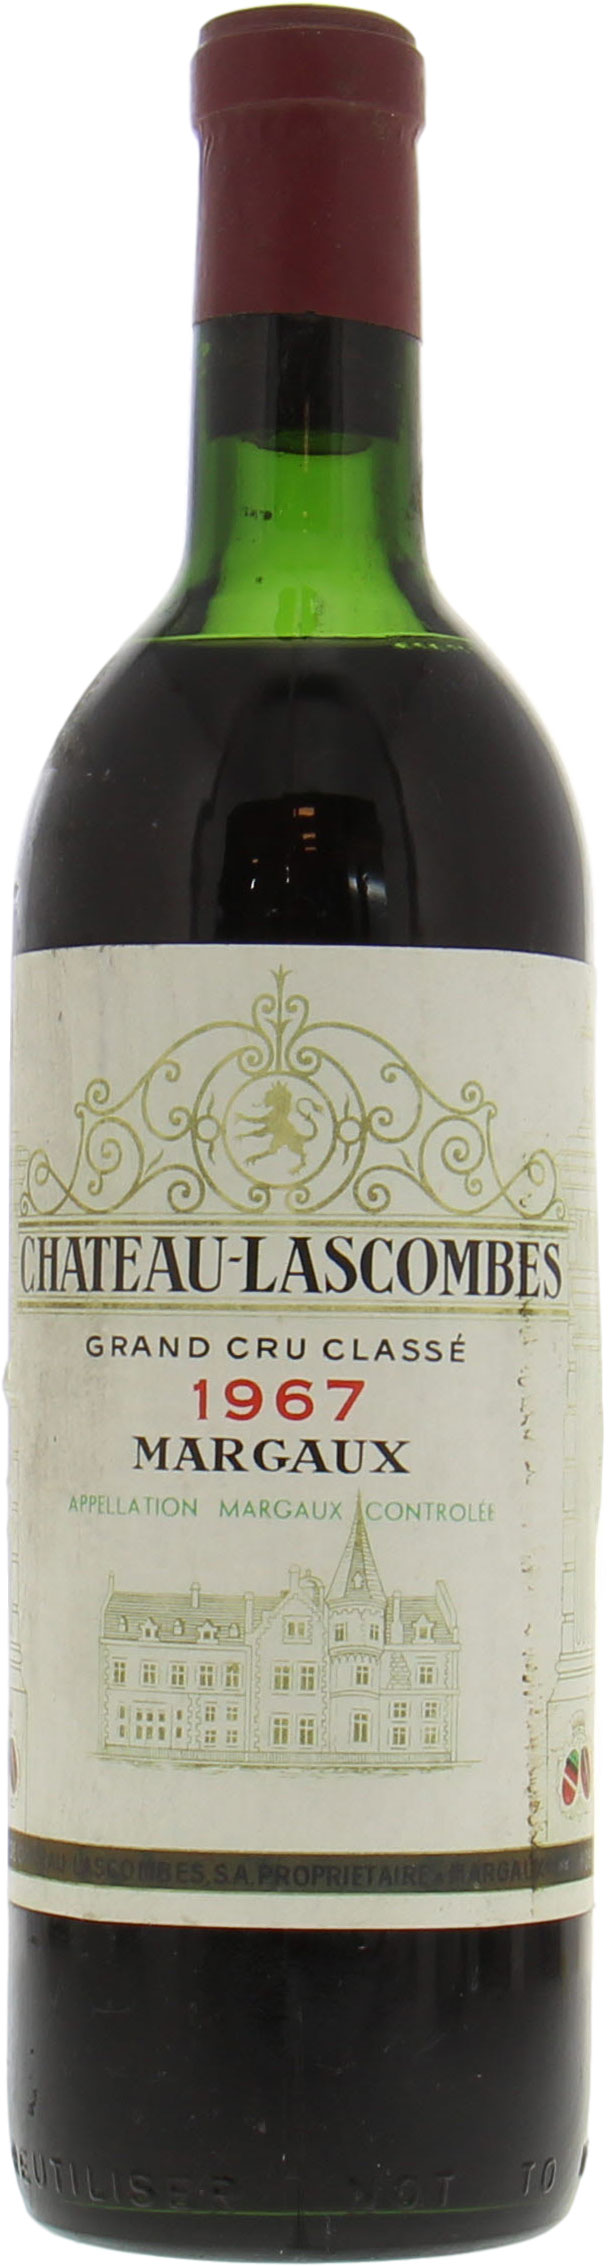 Chateau Lascombes - Chateau Lascombes 1967 High shoulder